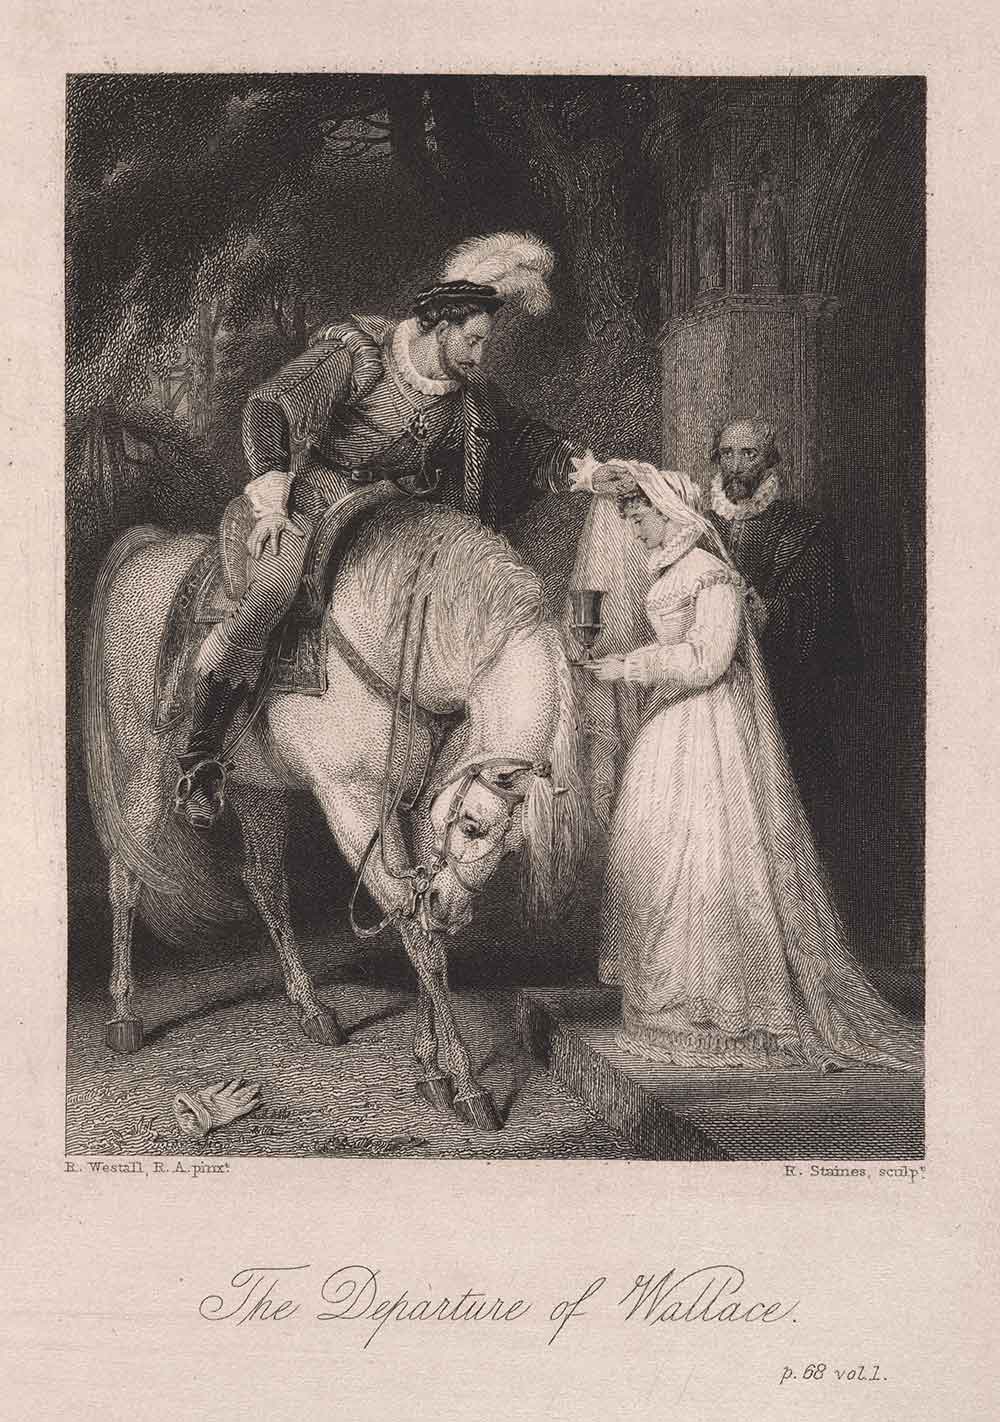 The Departure of Wallace, by R. Stames after R. Westall, in Jane Porter’s The Scottish Chiefs: Revised, corrected, and illustrated with a new retrospective introduction